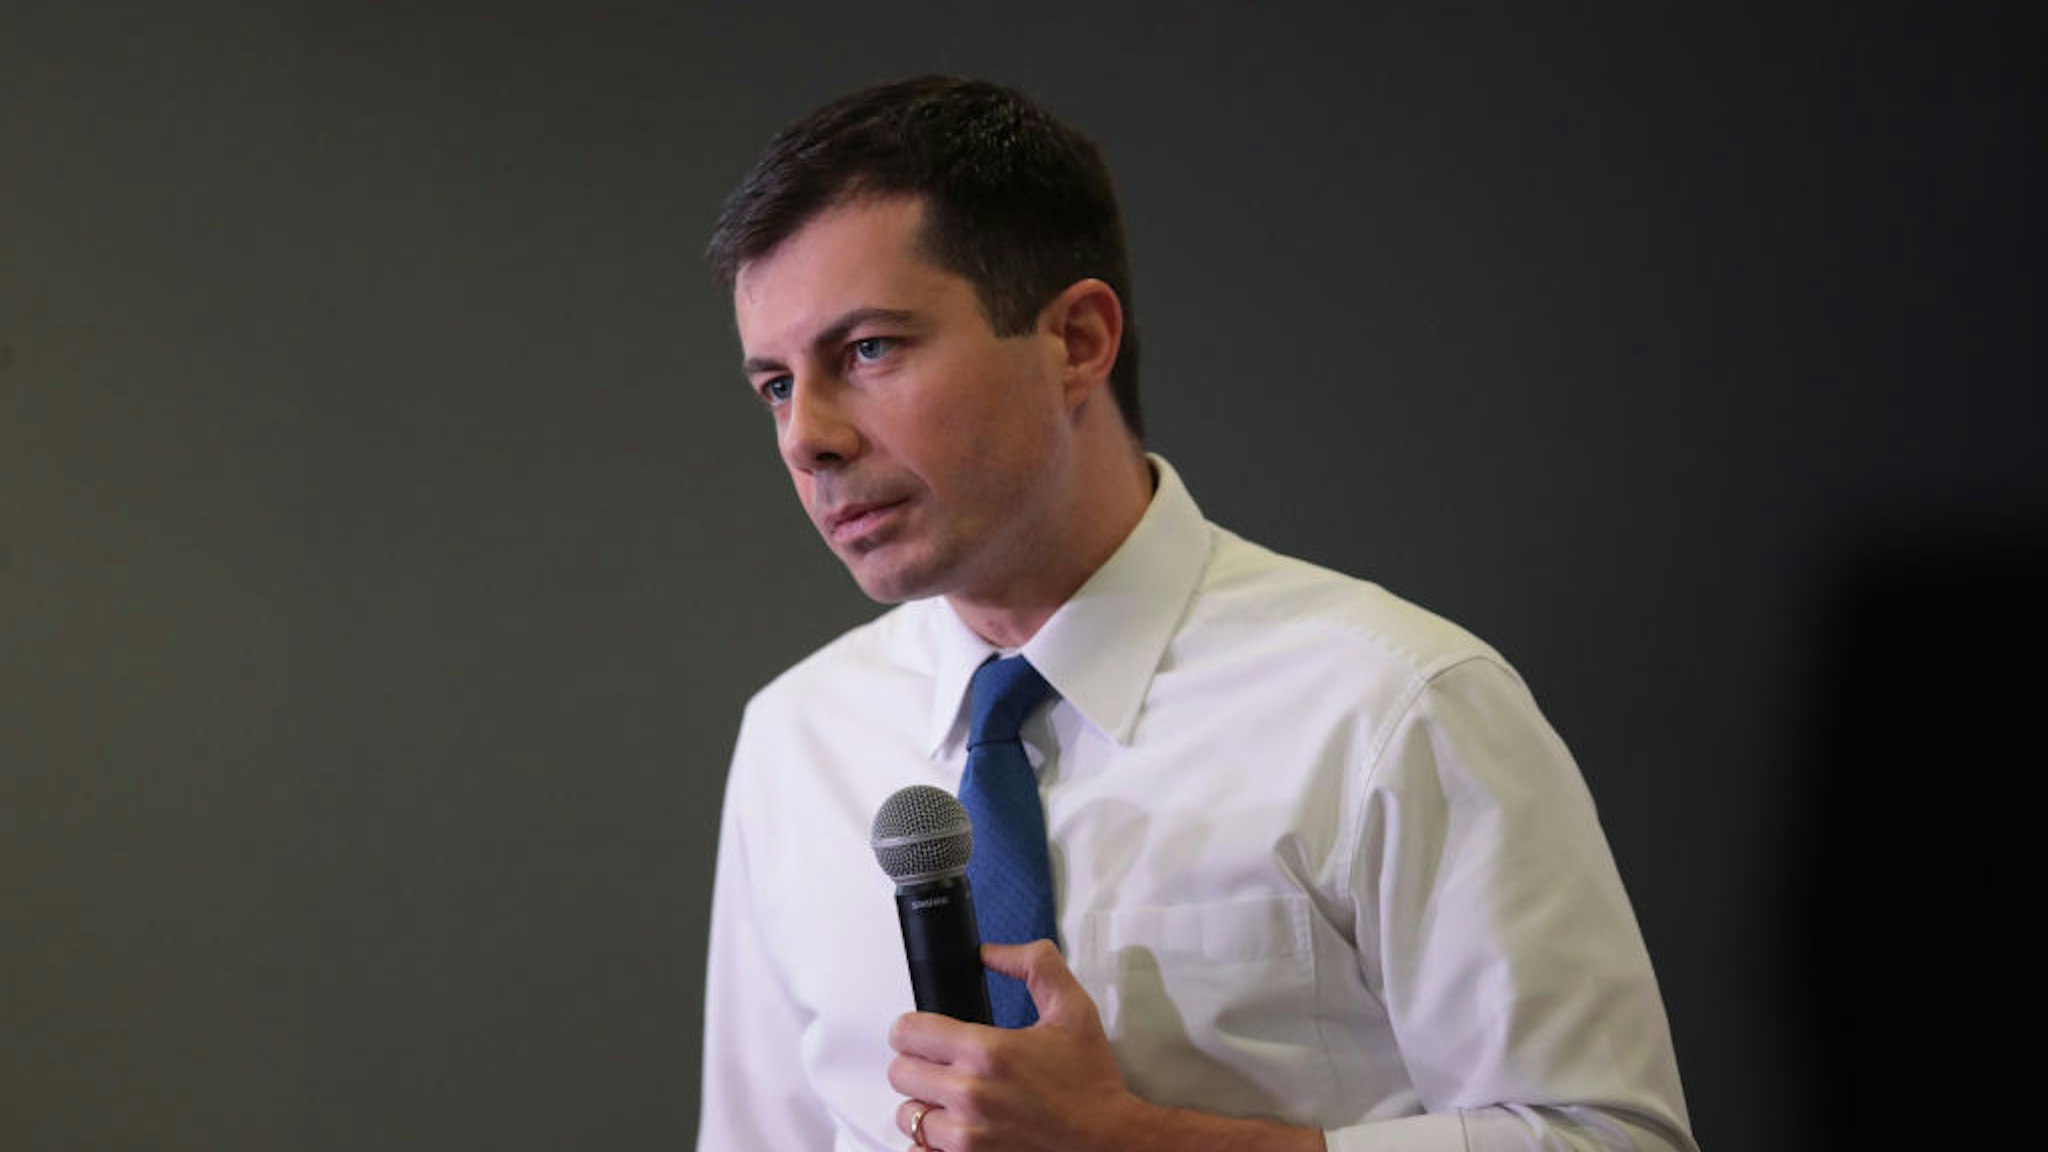 Democratic presidential candidate South Bend, Indiana Mayor Pete Buttigieg speaks to guests during a campaign stop at the YMCA on November 25, 2019 in Creston, Iowa.